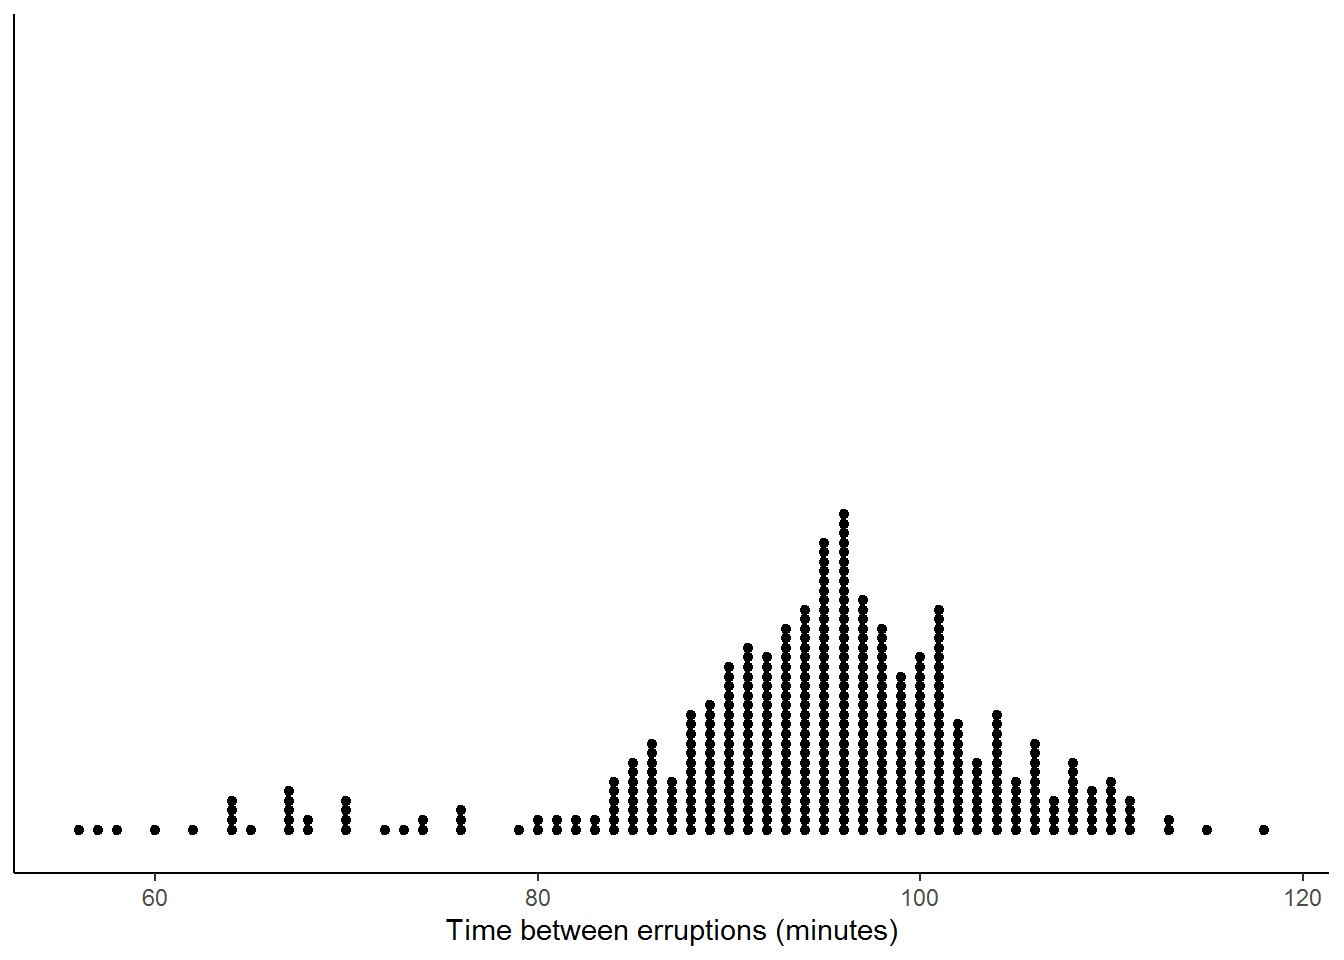 Dot Plot of Eruption Times using R and ggplot2